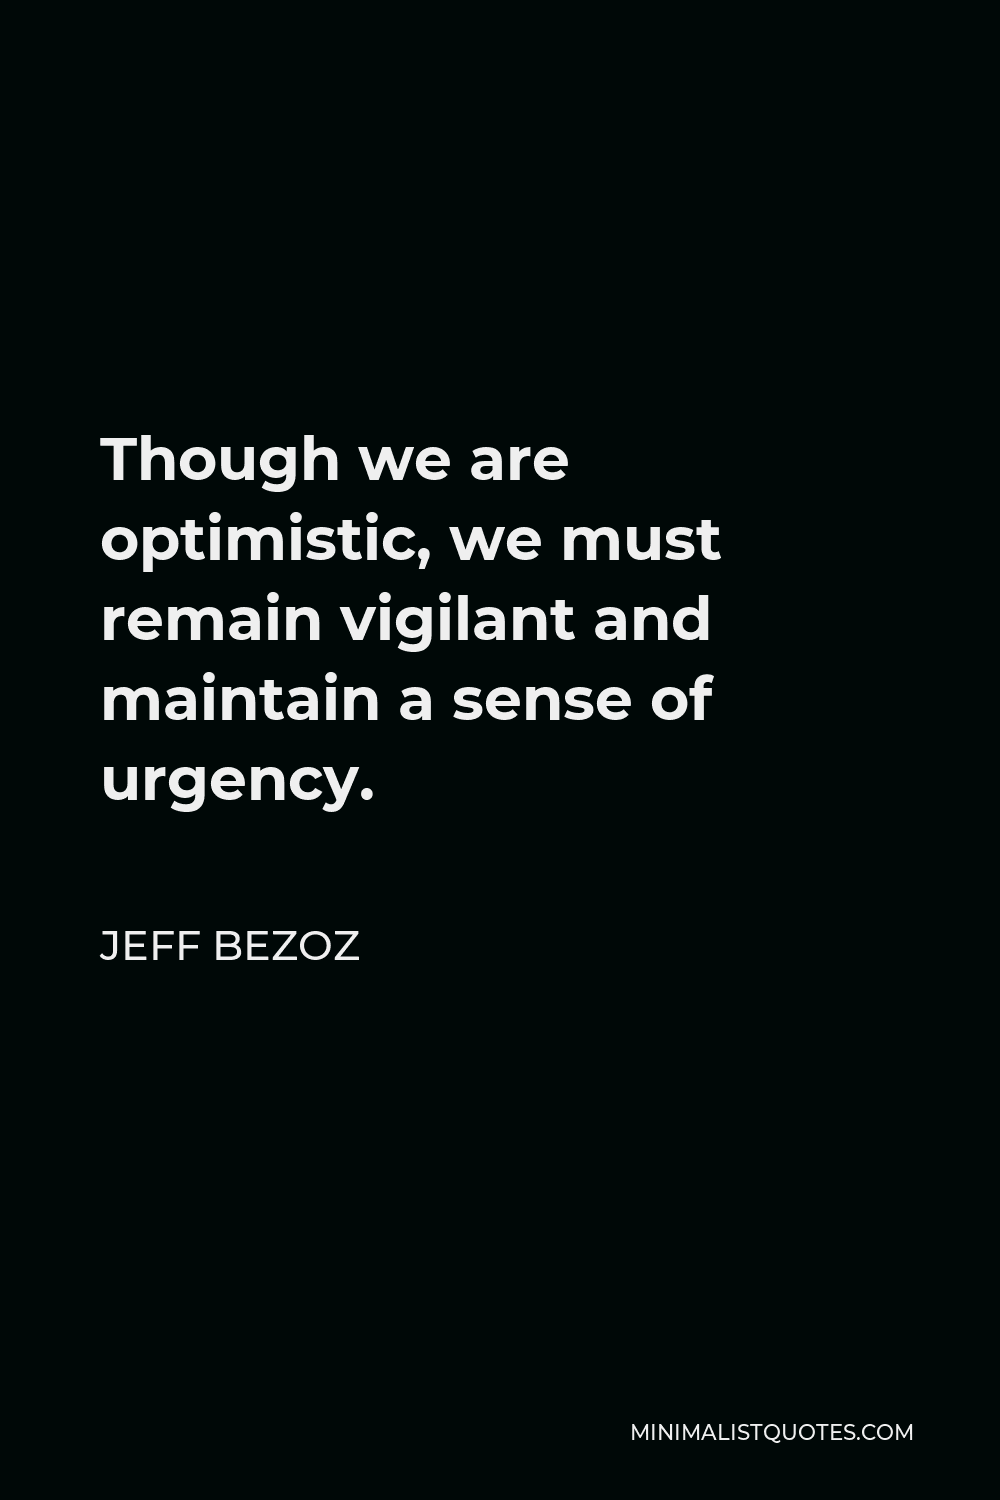 Jeff Bezoz Quote - Though we are optimistic, we must remain vigilant and maintain a sense of urgency.